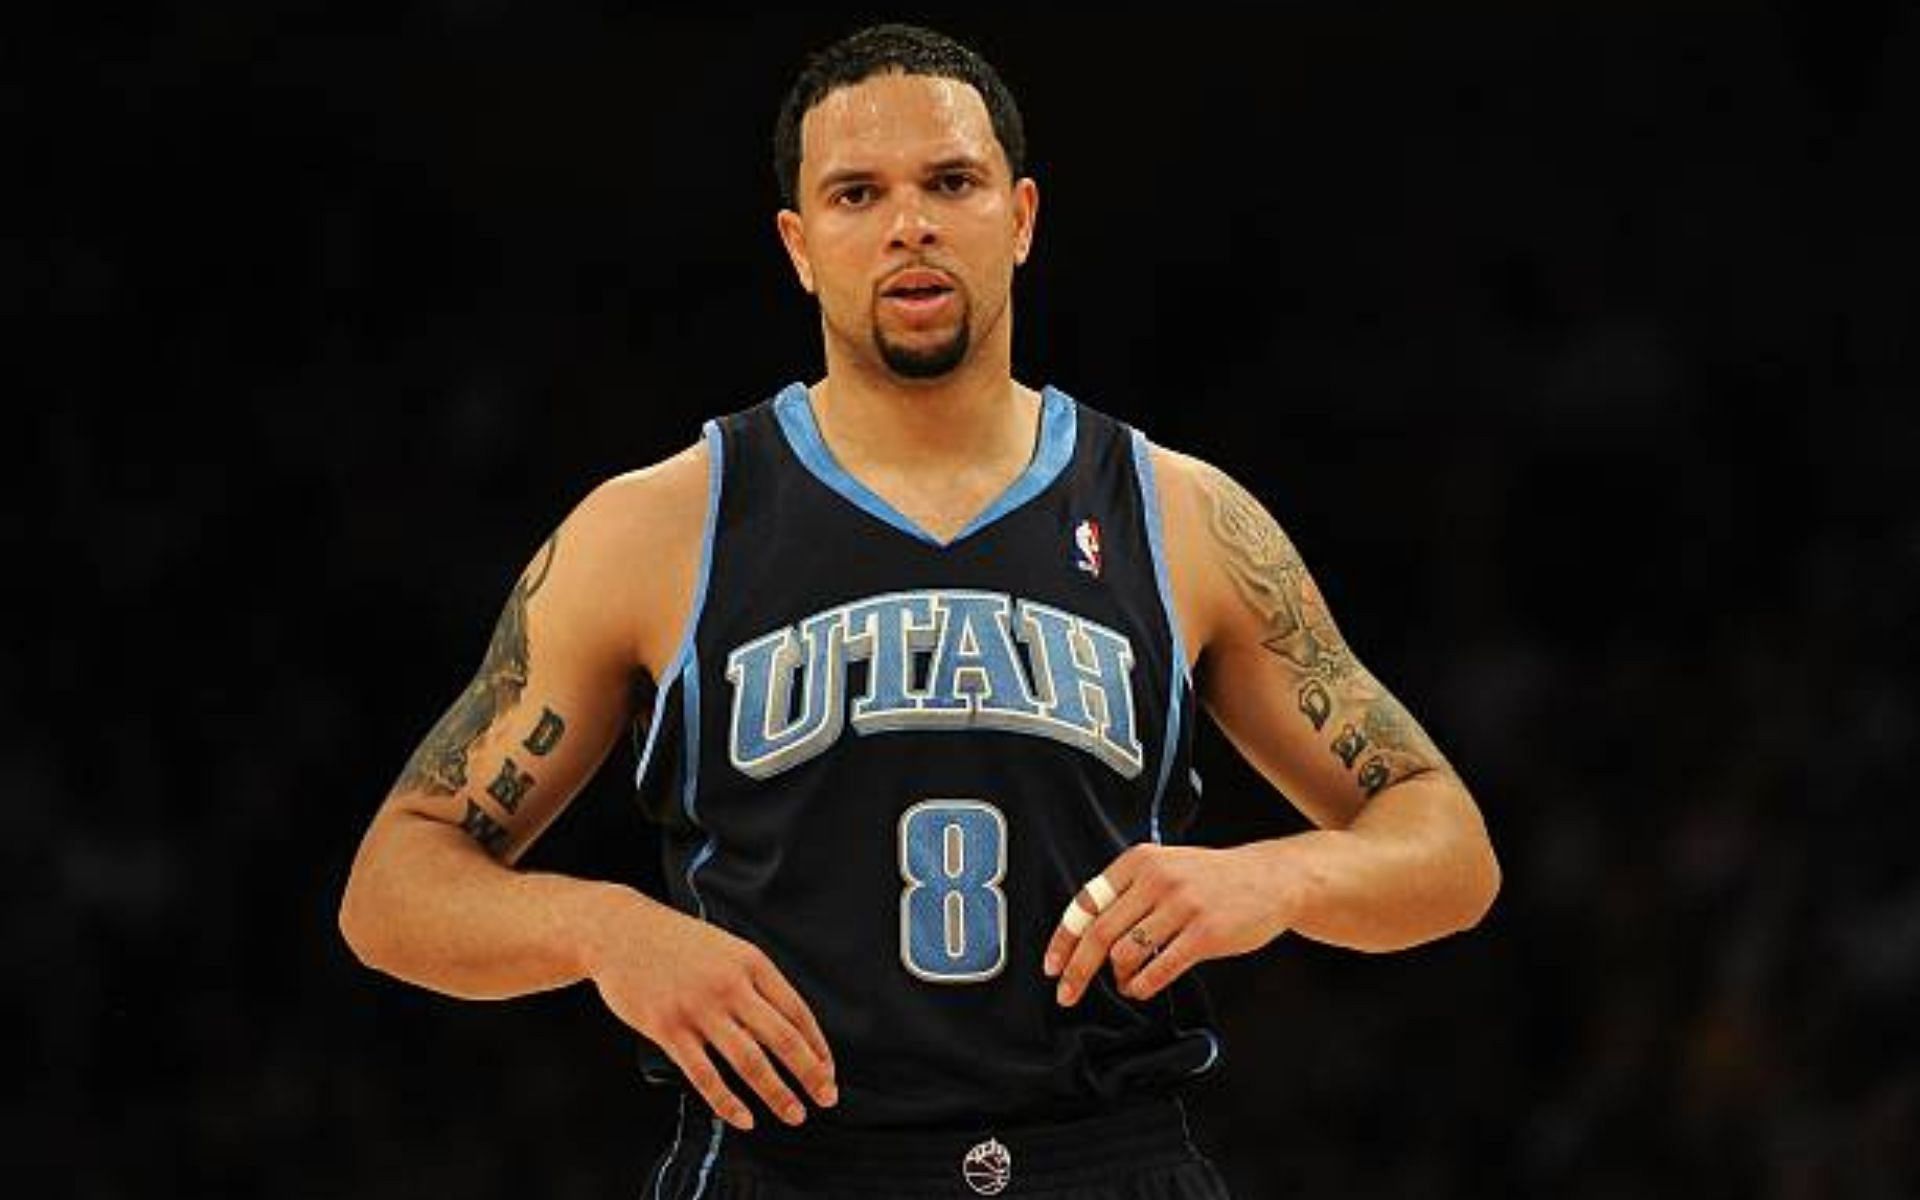 Deron Williams says players don't want to join Utah Jazz